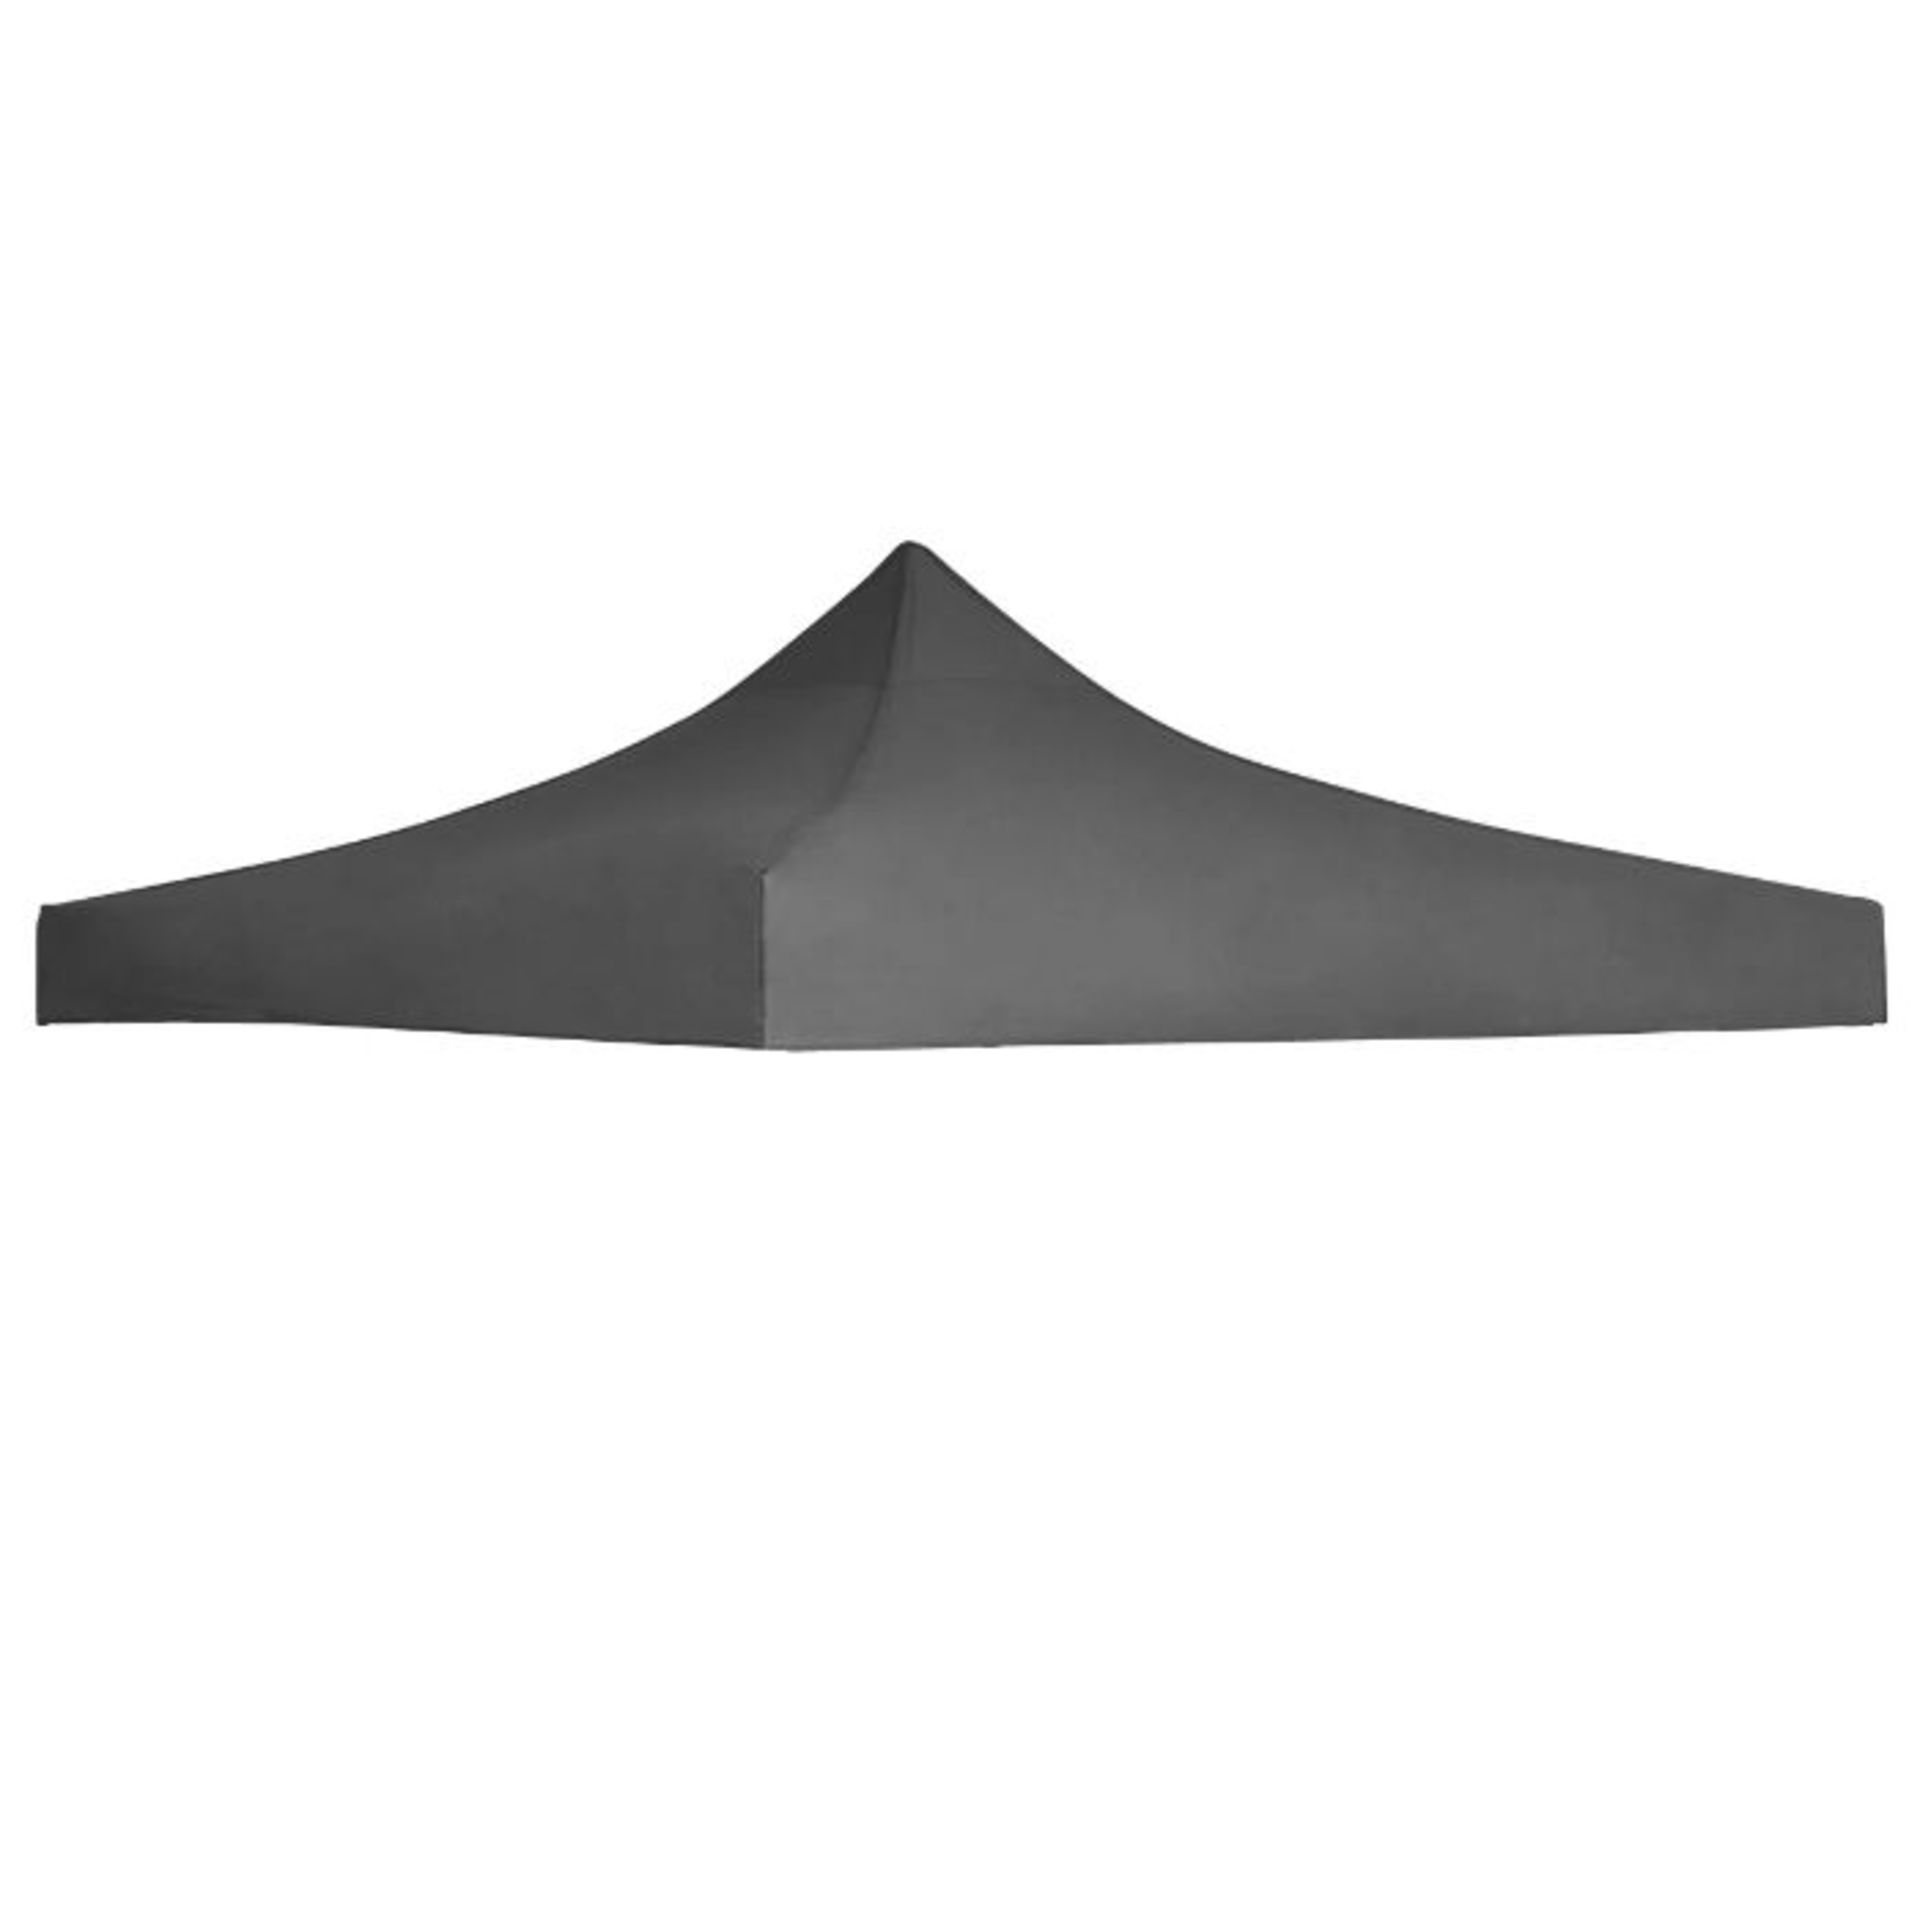 Freeport Park, Replacement Canopy RRP -£33.99 (27536/15 - BF940548) (RETURN, NOT CHECKED)